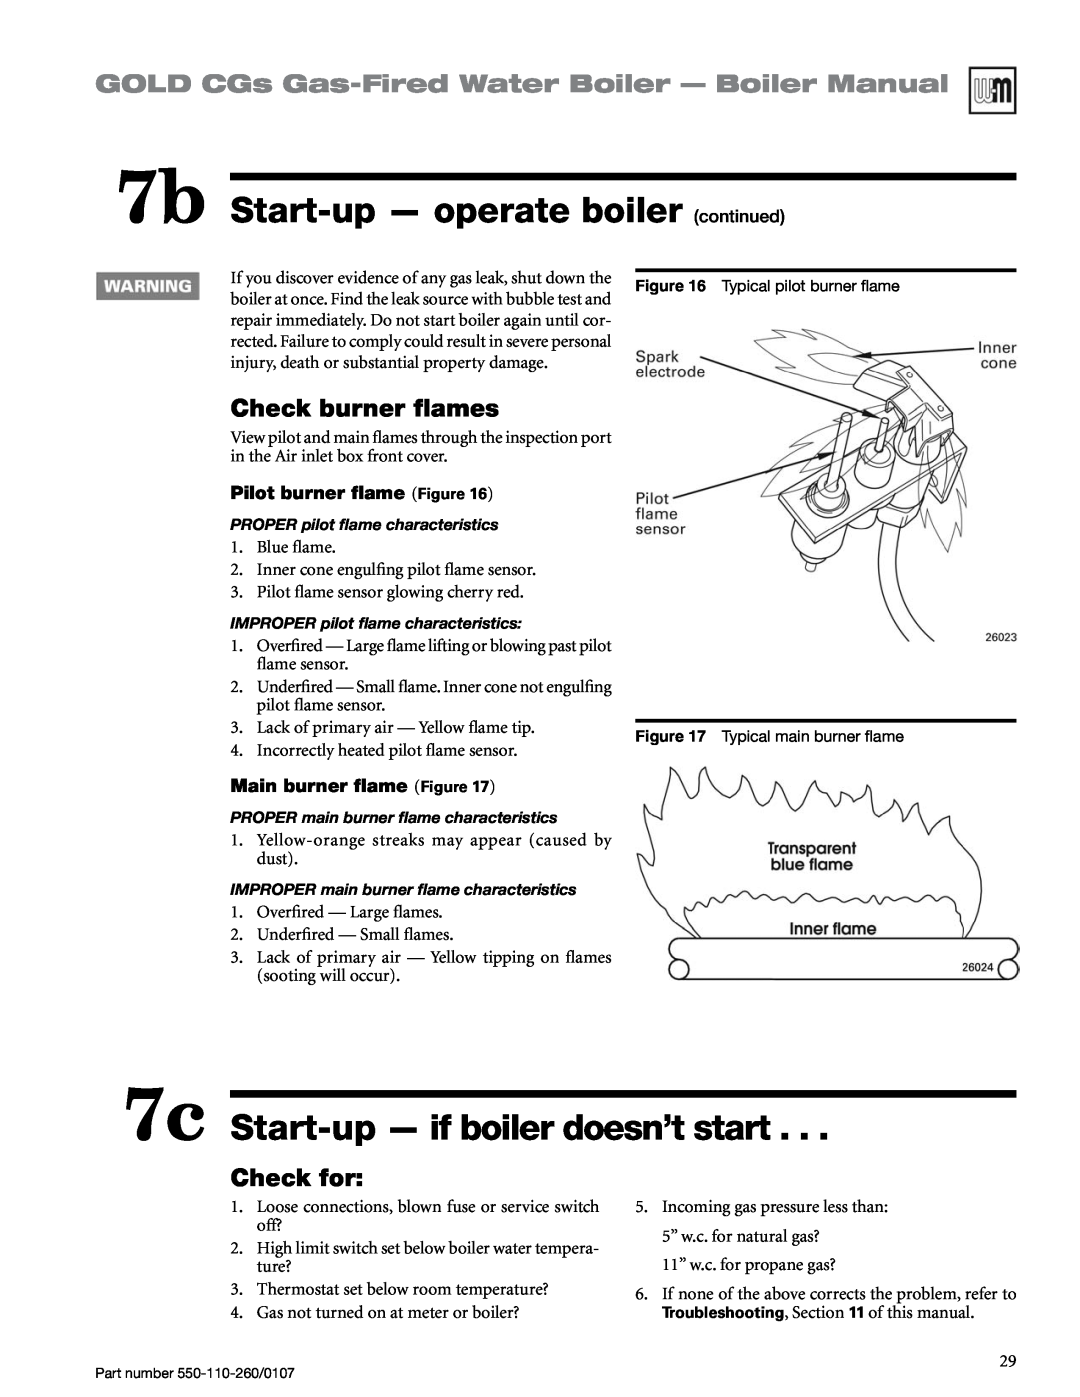 Weil-McLain 550-110-260/0107 manual 7b Start-up— operate boiler continued, 7c Start-up- if boiler doesn’t start, Check for 